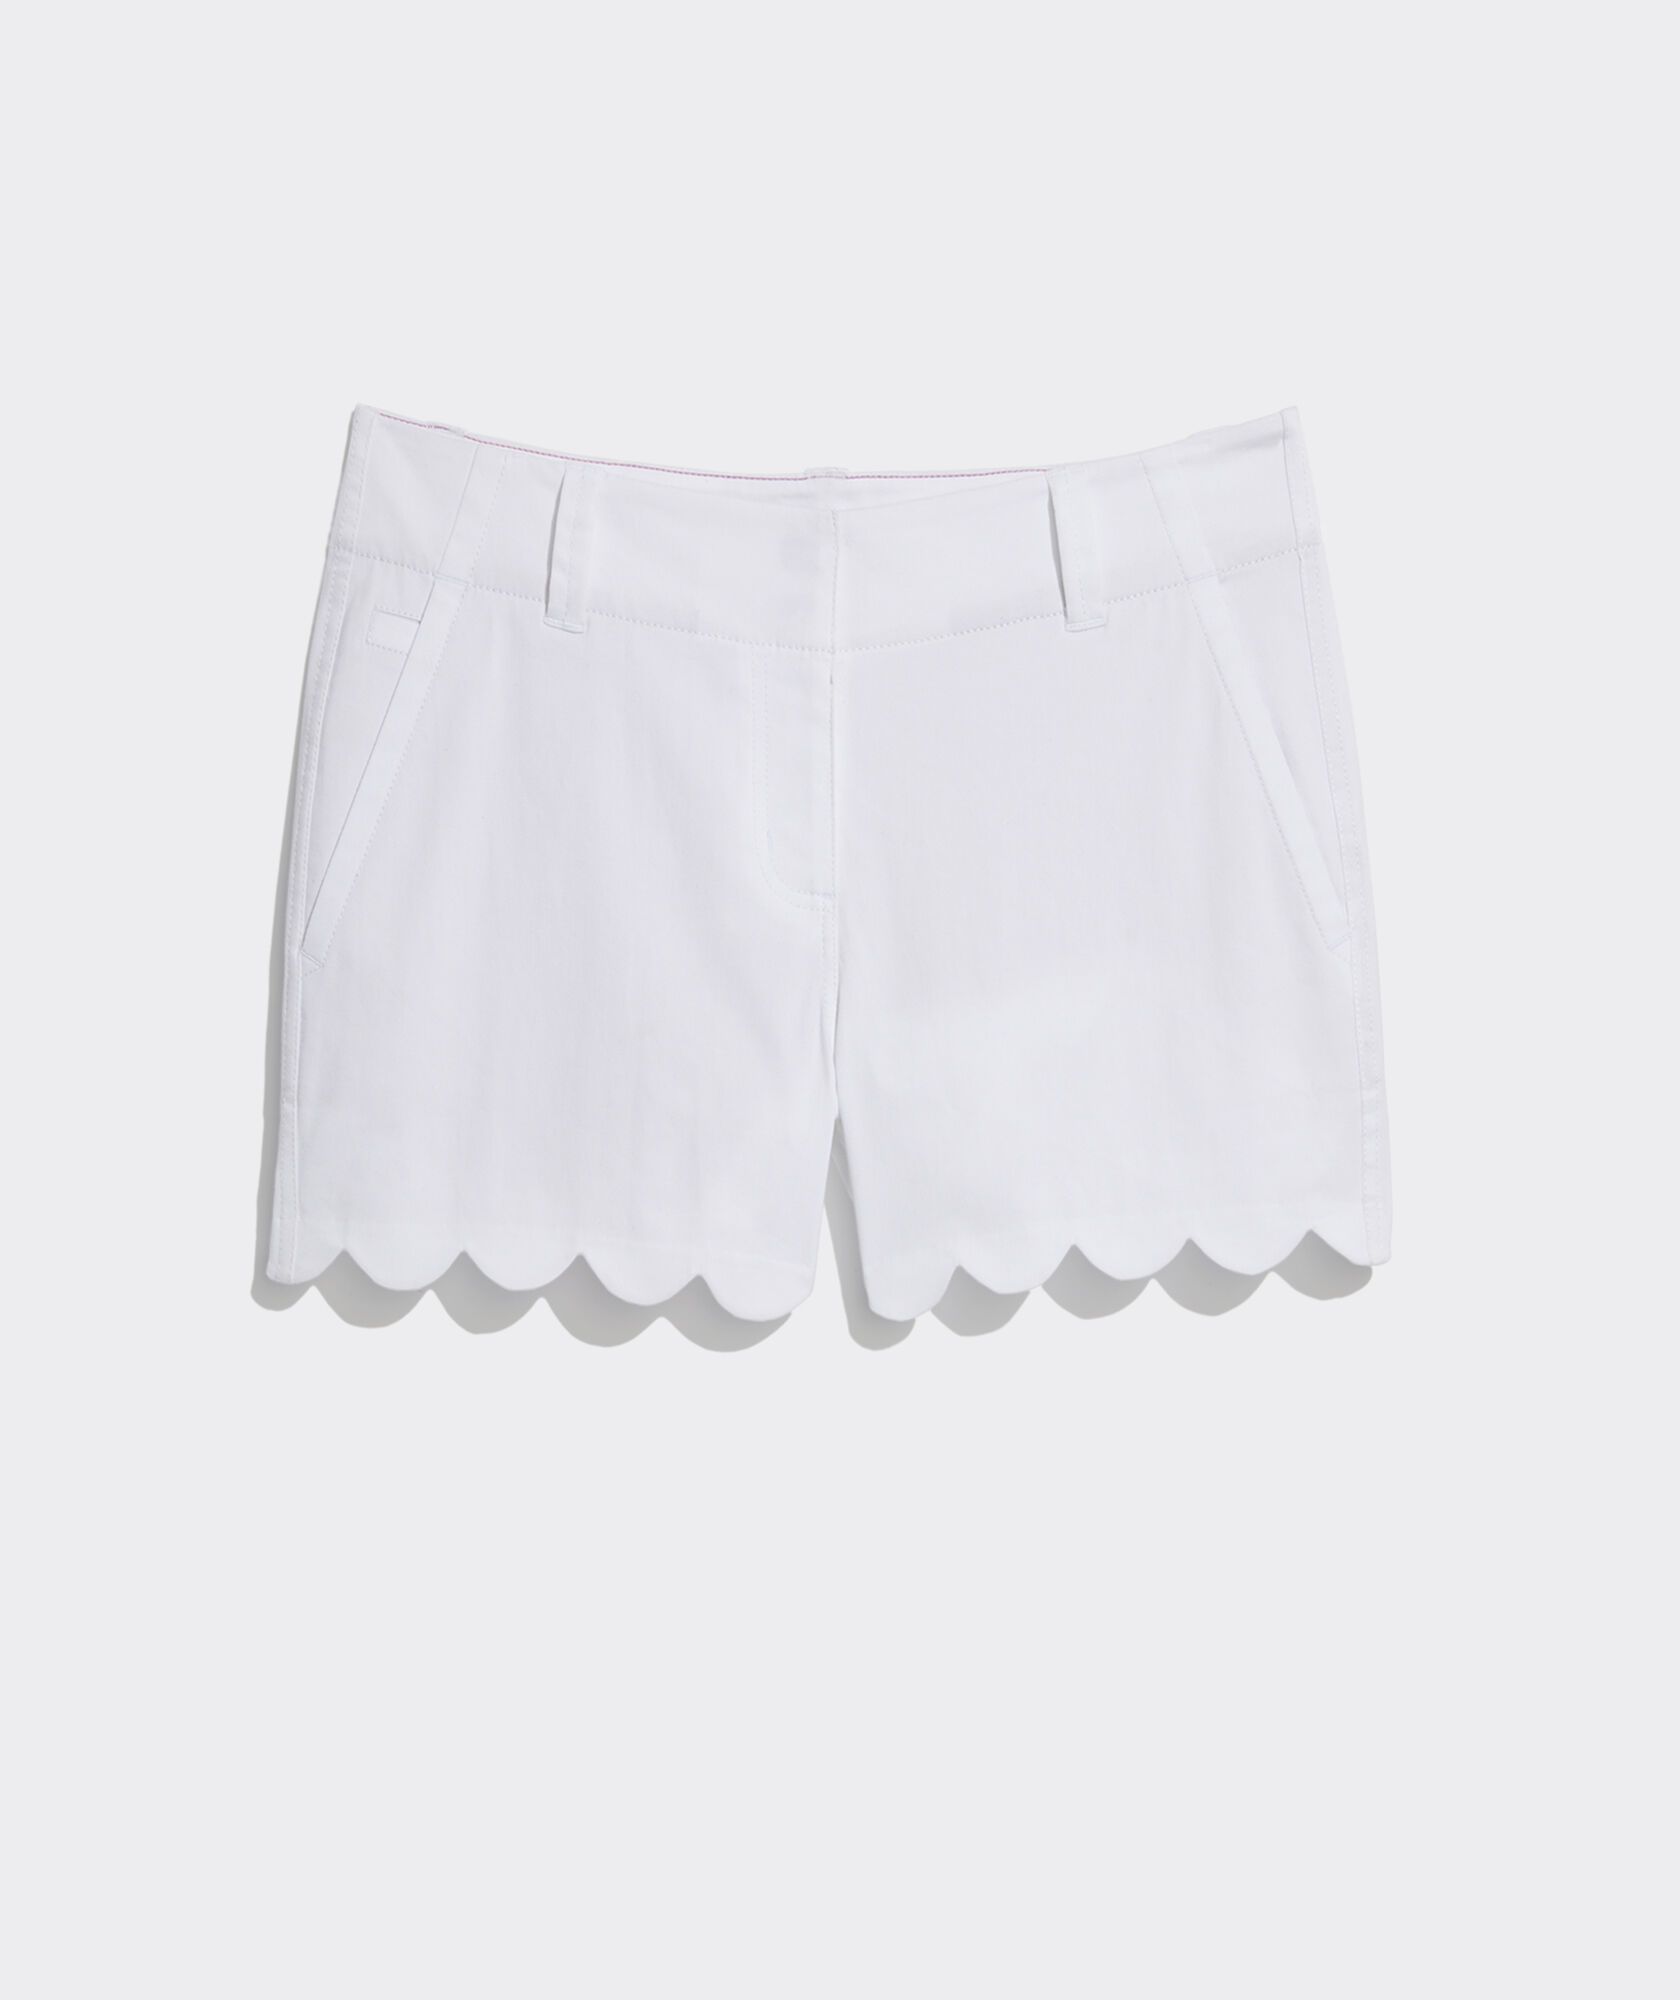 3.5 Inch Scallop Every Day Shorts | vineyard vines